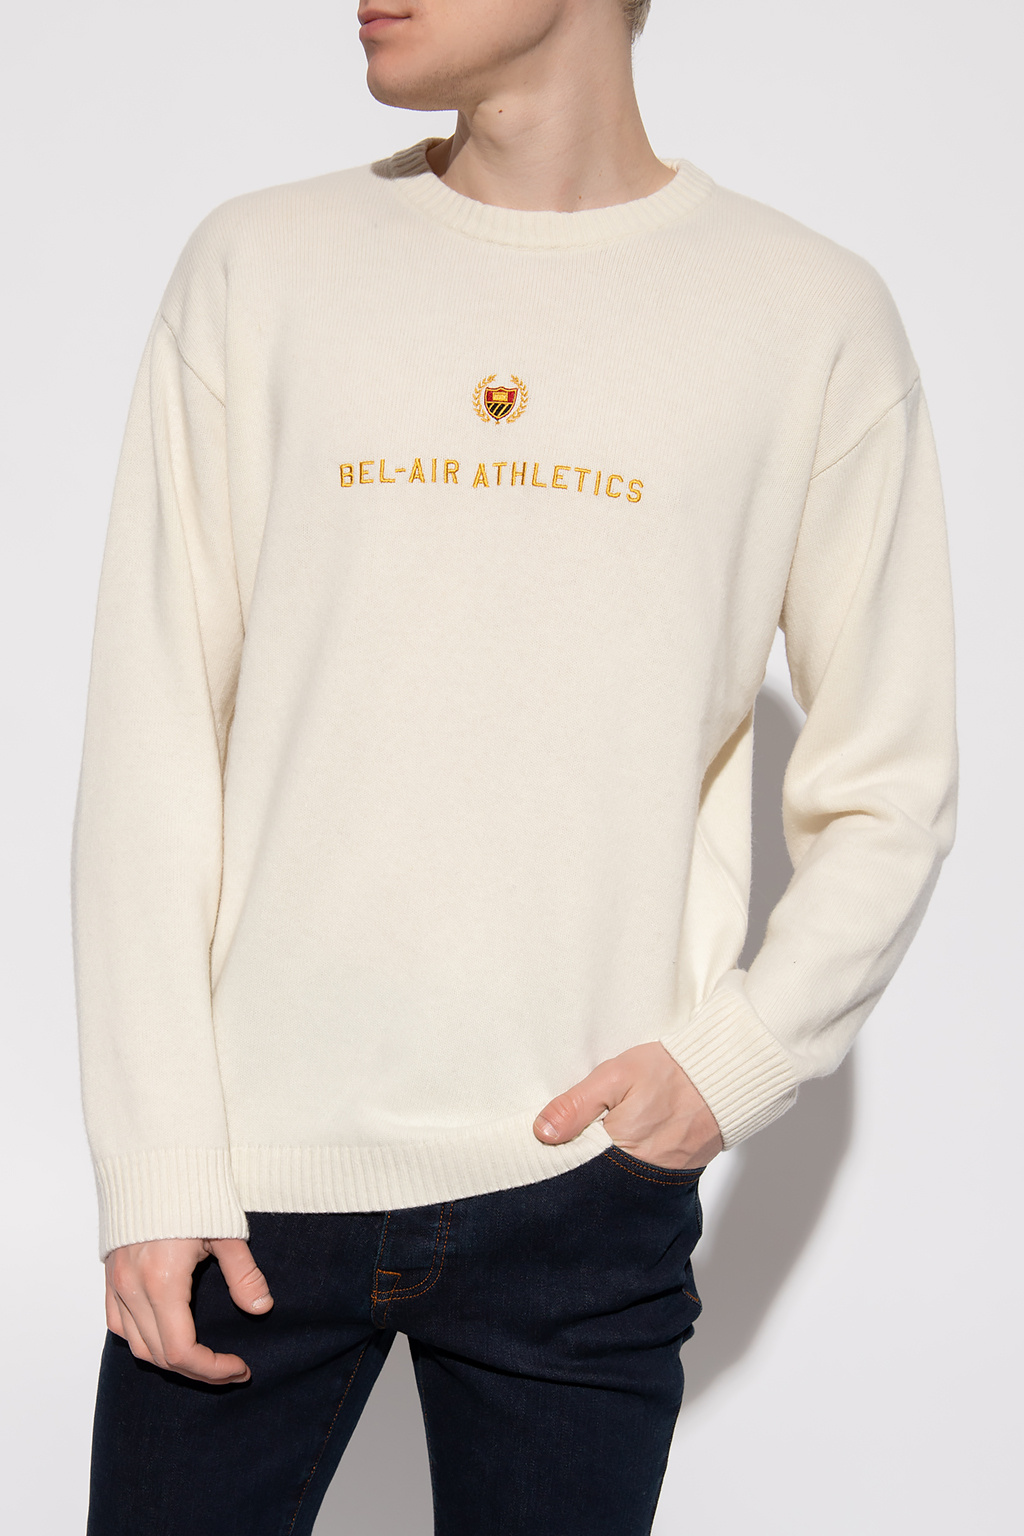 Bel Air Athletics Sweater with logo